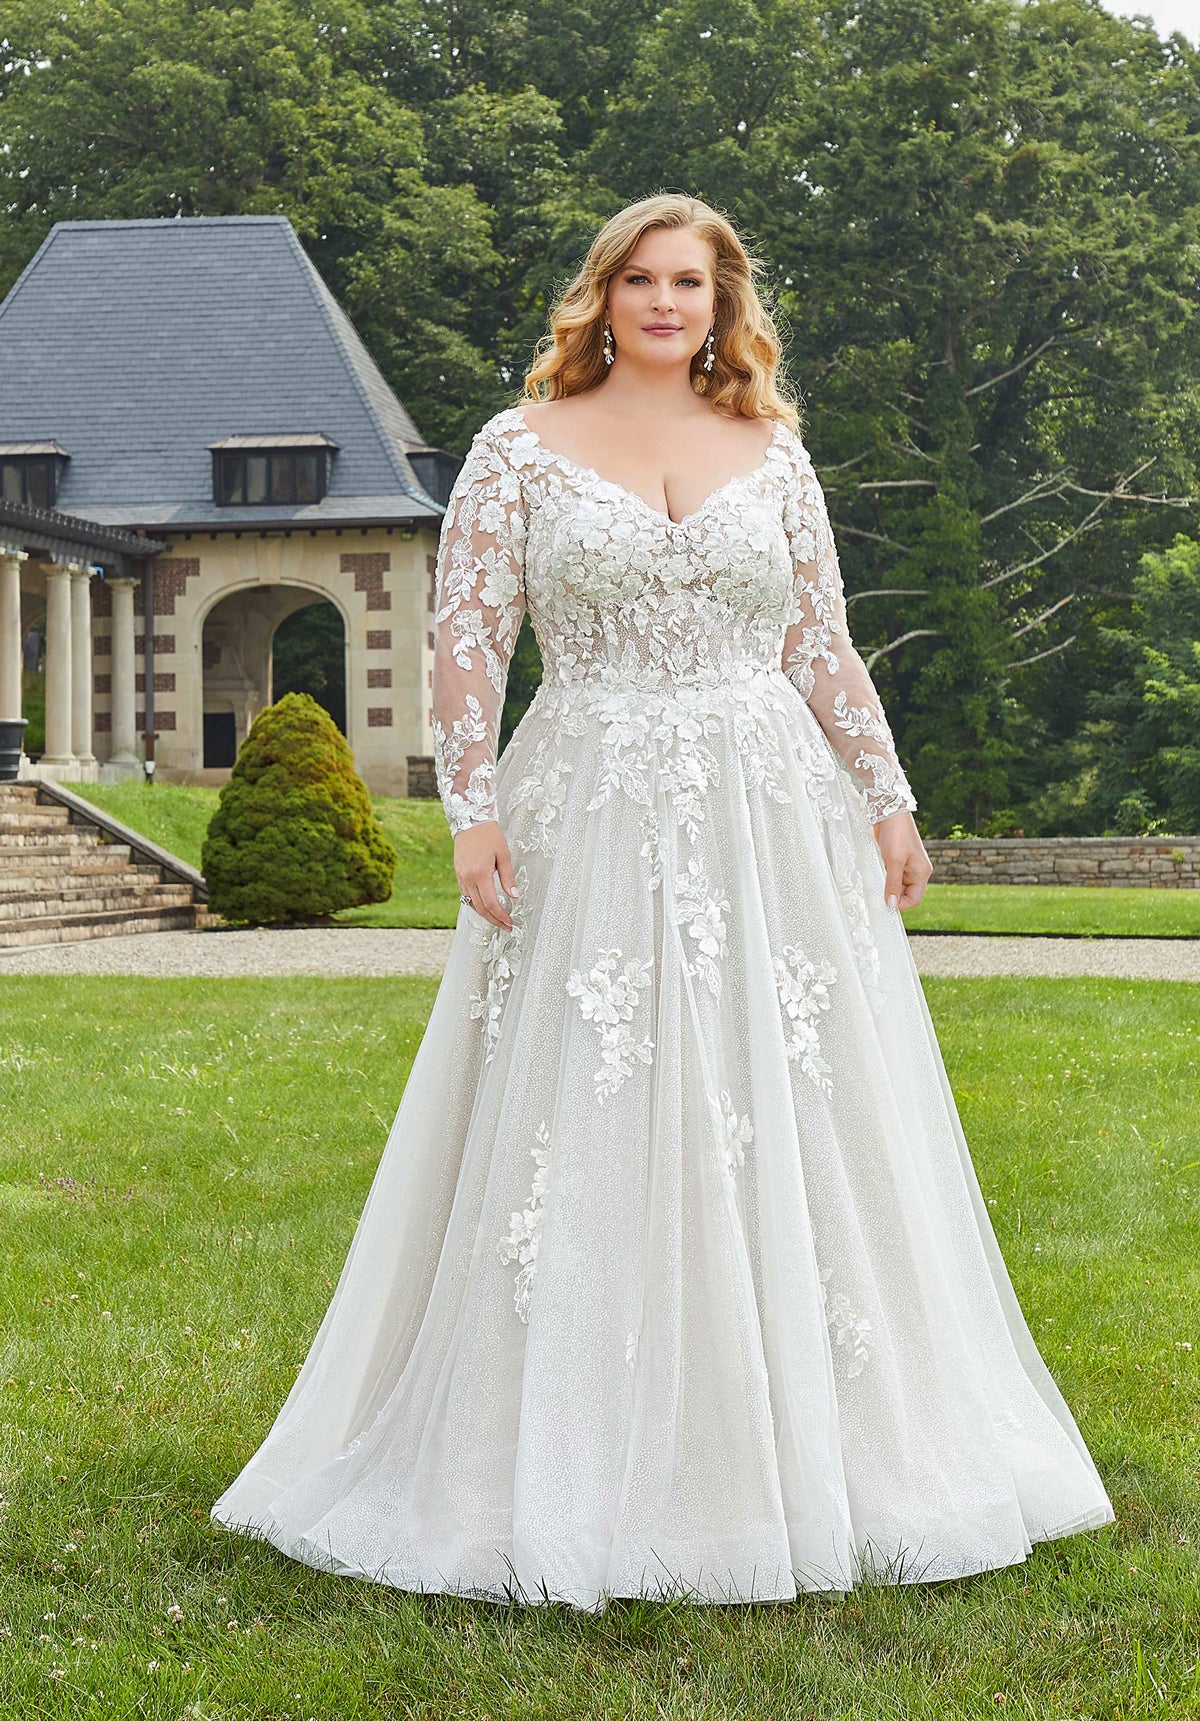 Julietta - 3354 - Emberly - Cheron's Bridal, Wedding Gown - Morilee Julietta - - Wedding Gowns Dresses Chattanooga Hixson Shops Boutiques Tennessee TN Georgia GA MSRP Lowest Prices Sale Discount